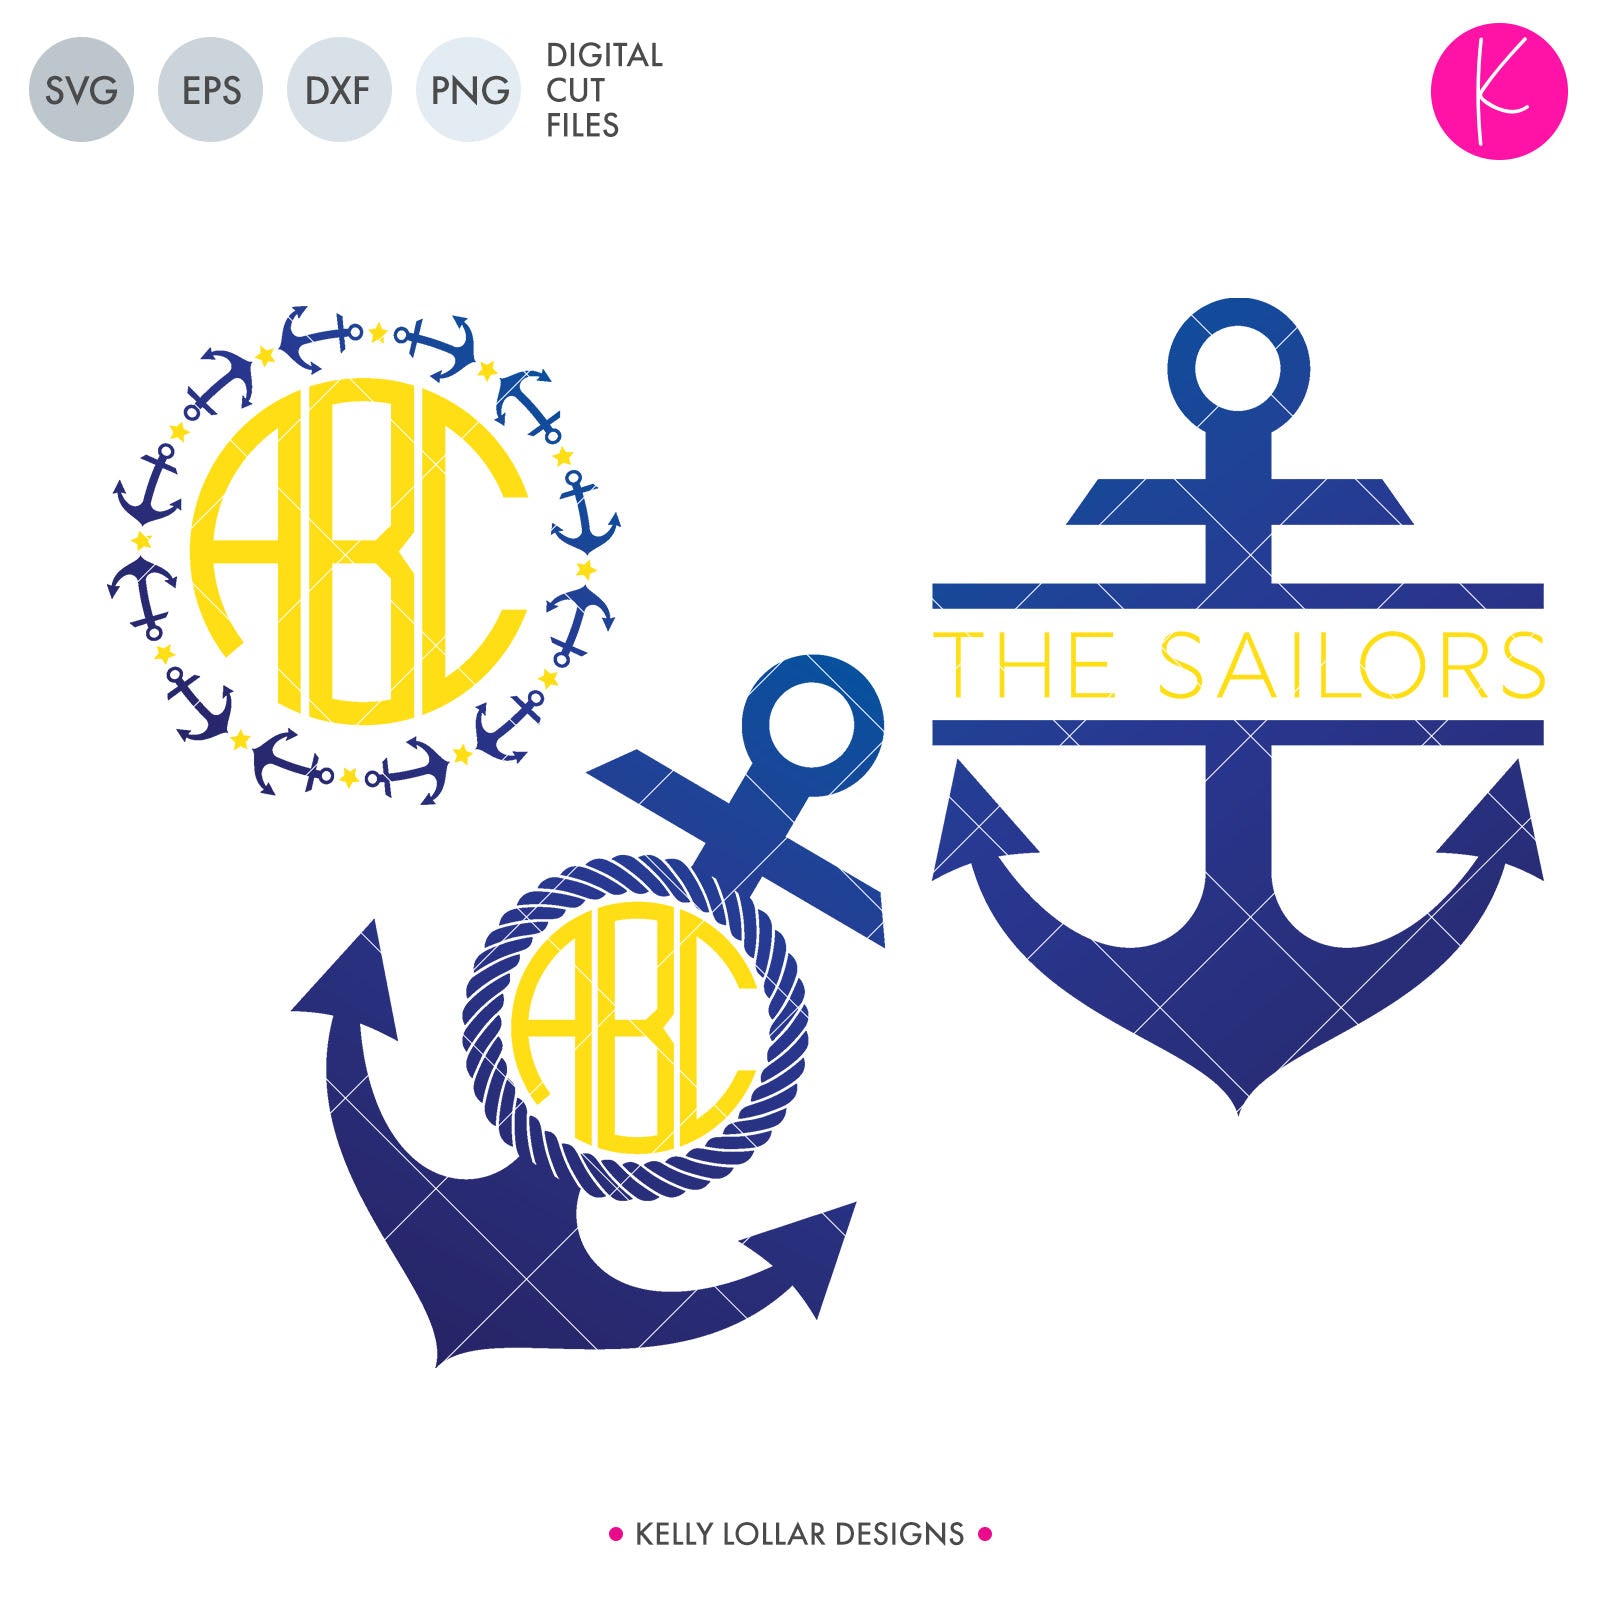 Download 4th Of July Summer Svg Dxf Eps Png Cut Files Kelly Lollar Designs Tagged Nautical